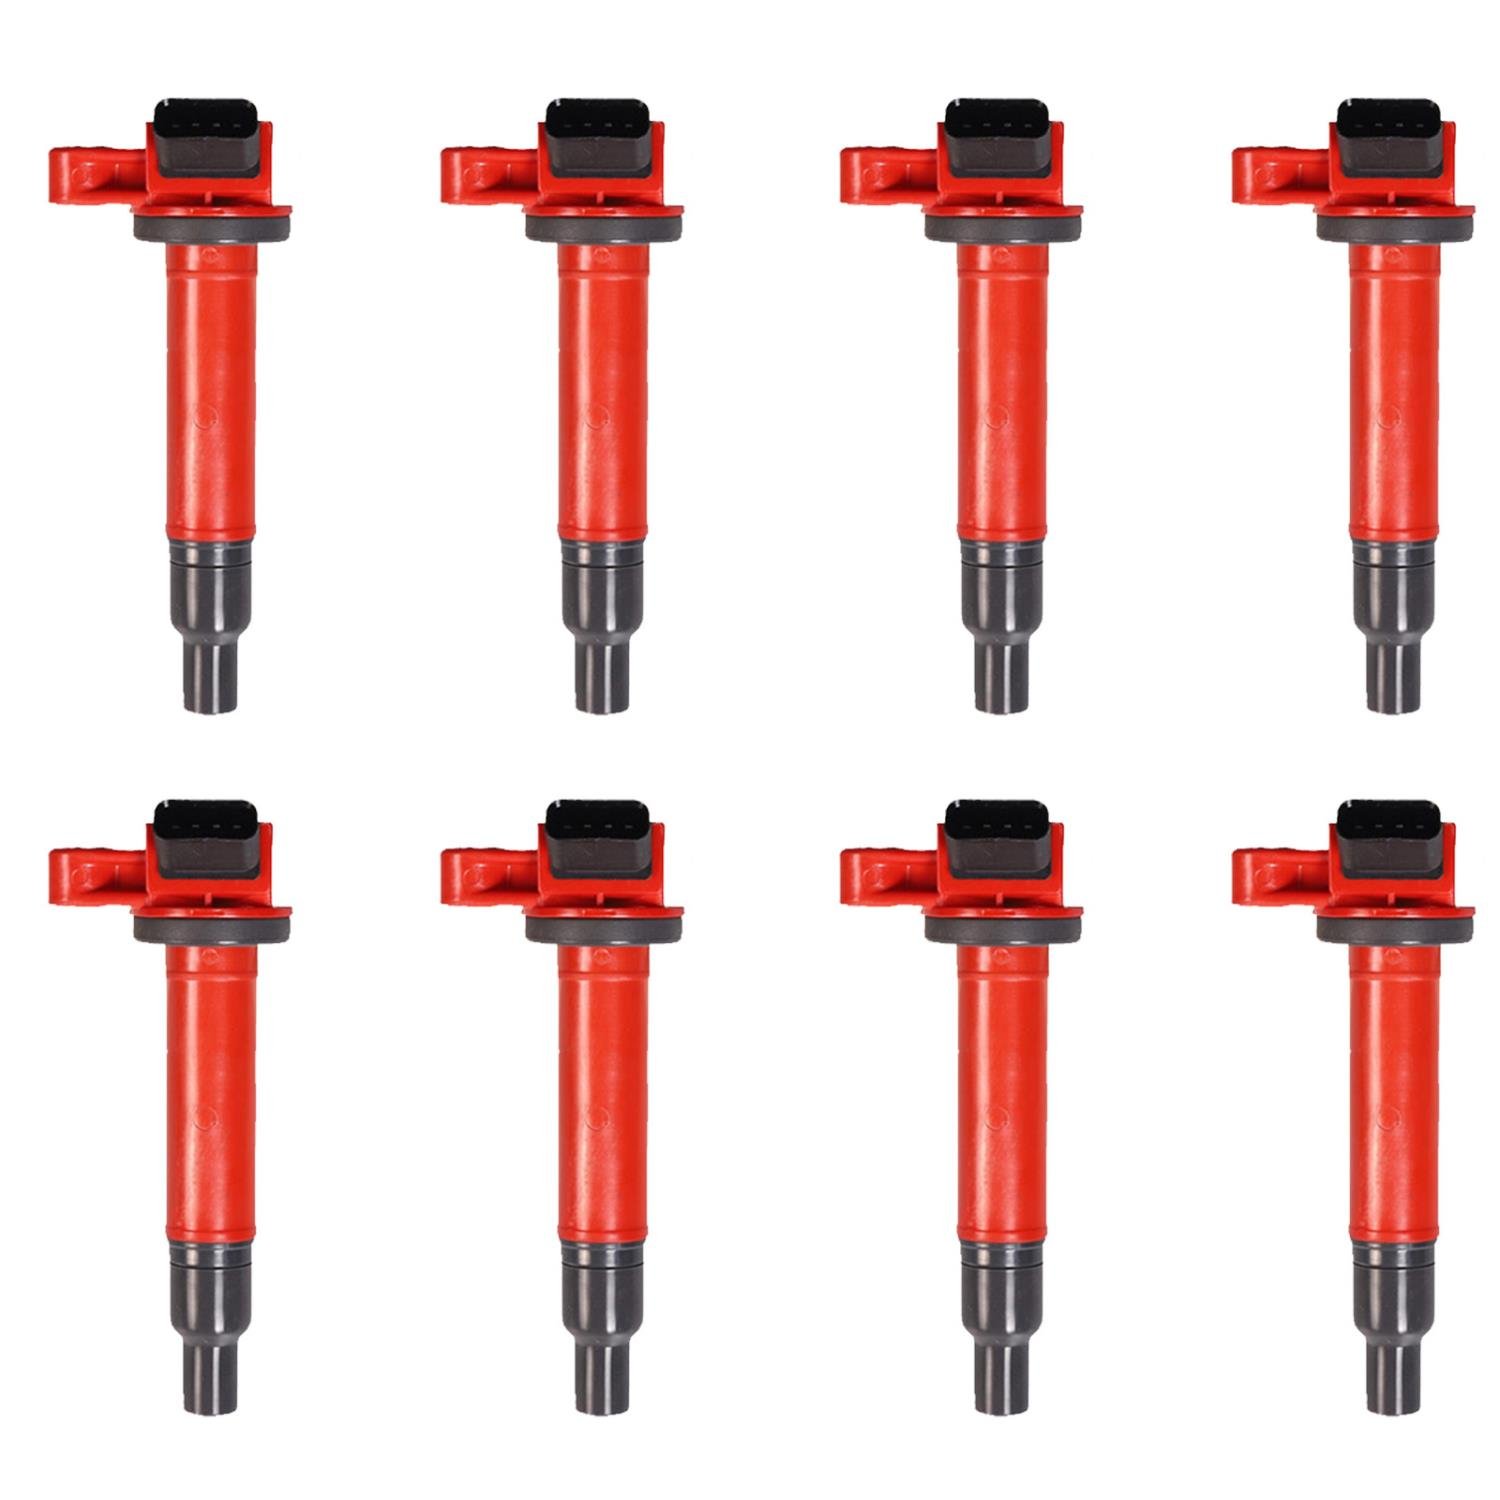 High-Performance Ignition Coils for Toyota Tundra/4-Runner [Red]